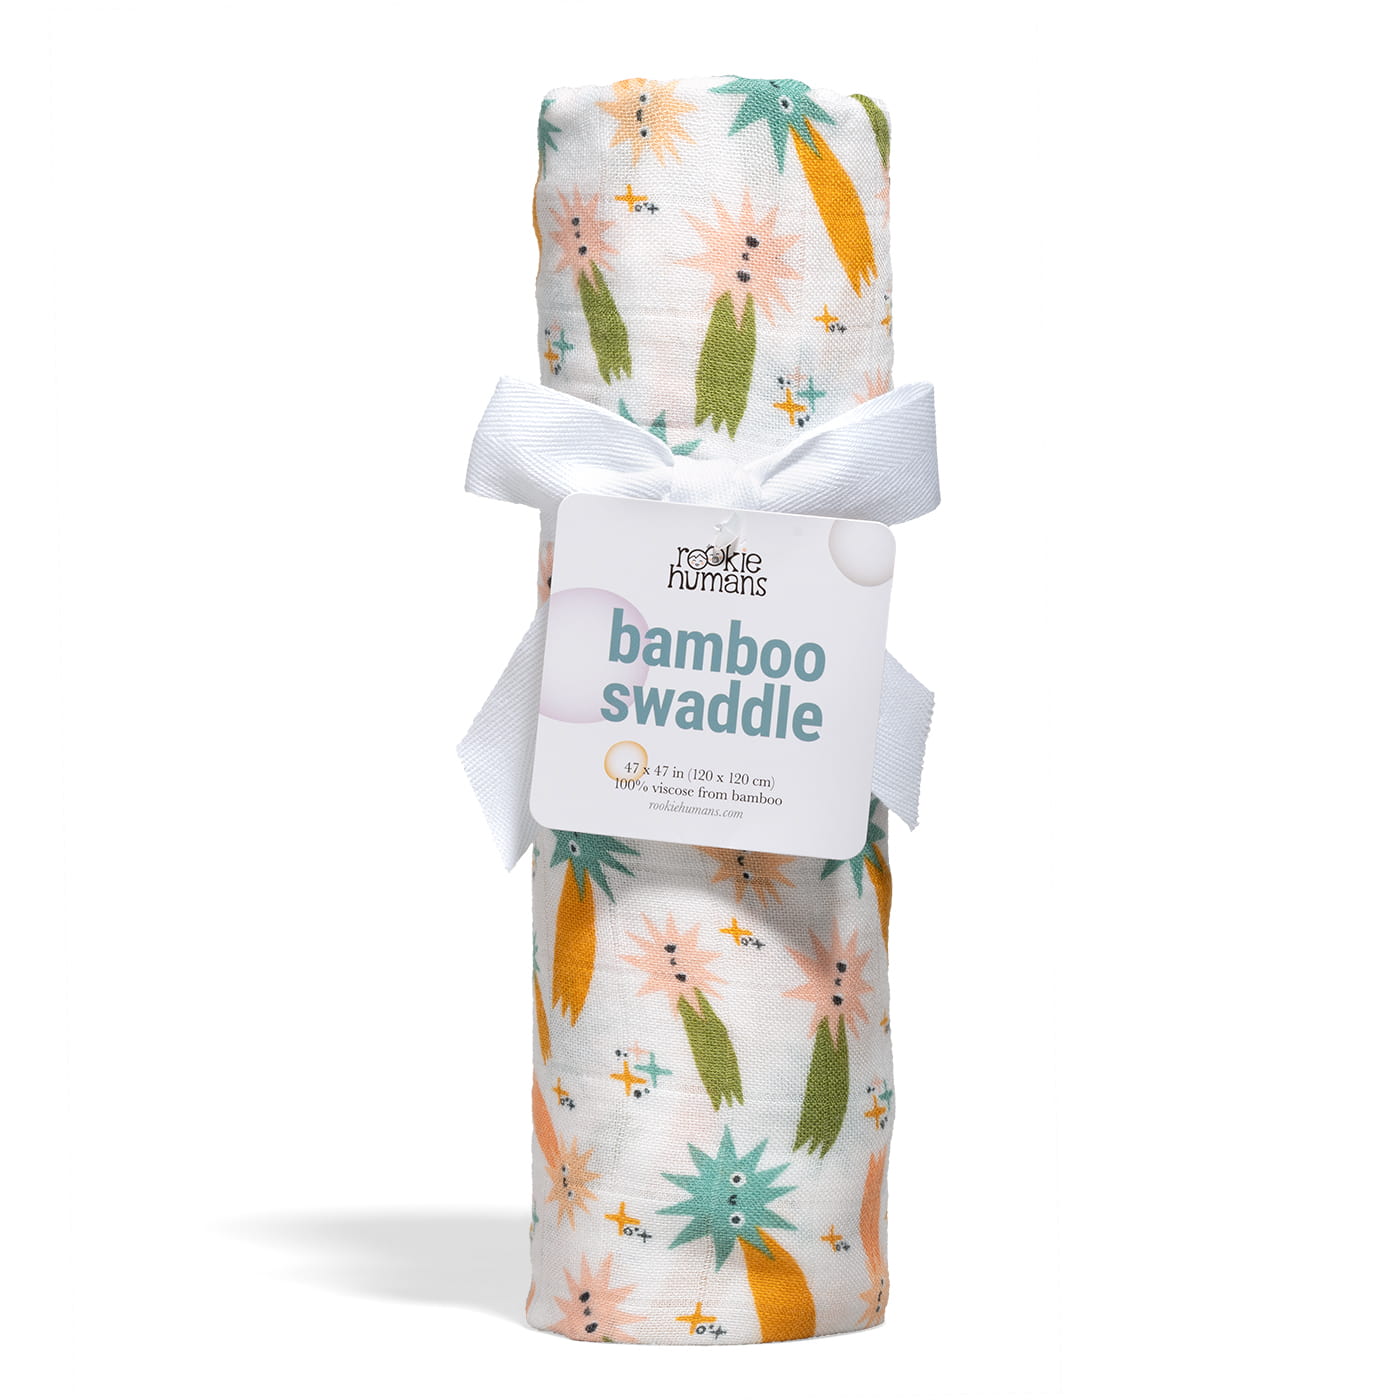 shooting star viscose from bamboo swaddle, gender neutral baby swaddle